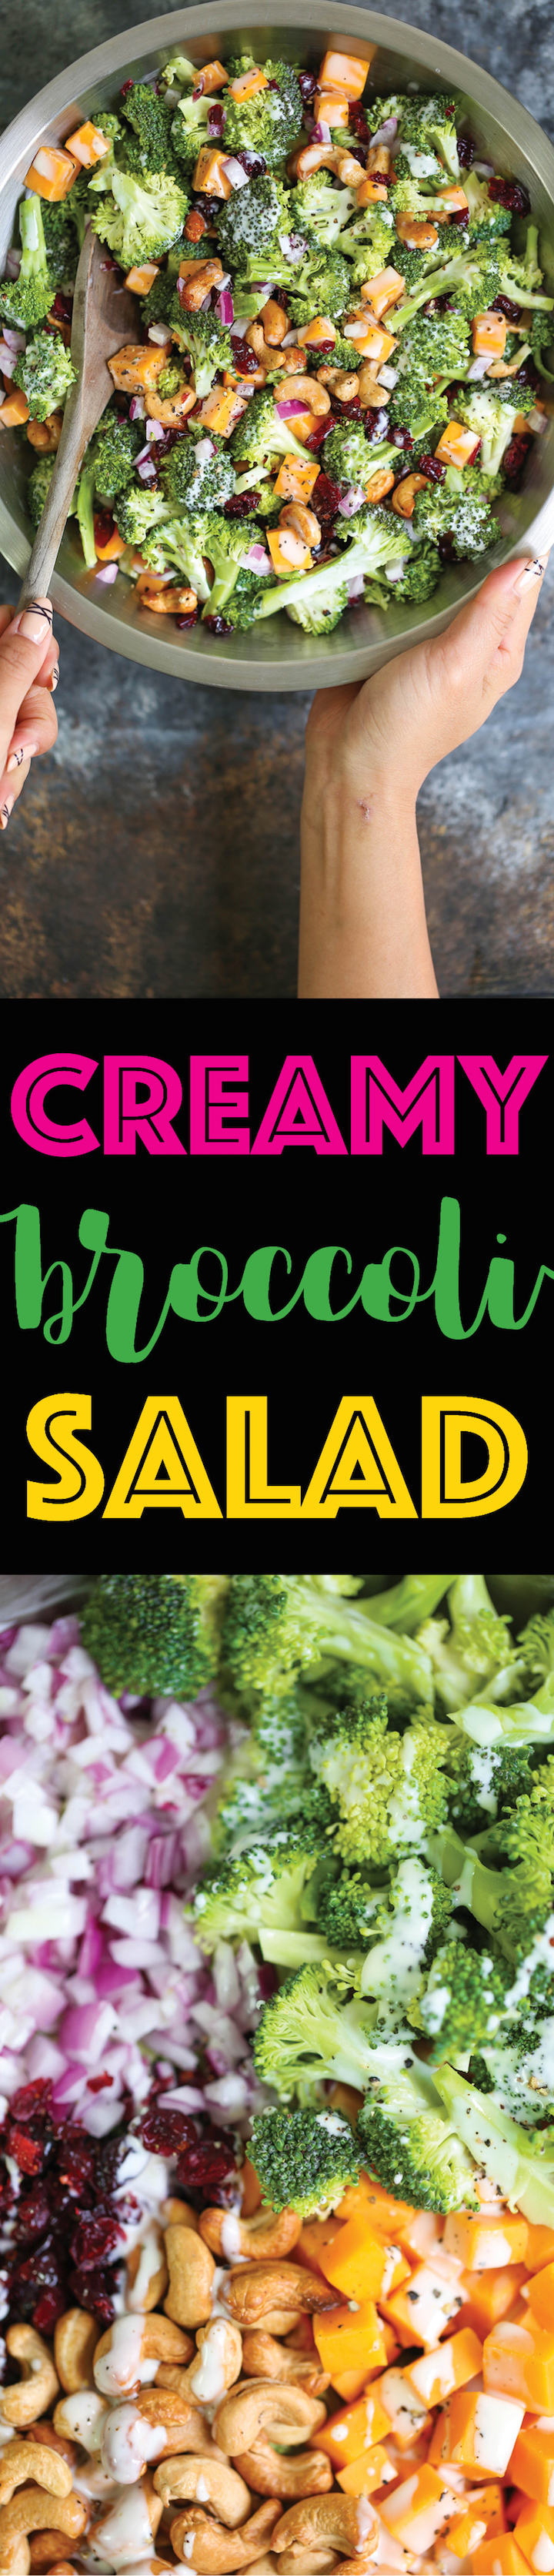 Creamy Broccoli Salad - The BEST broccoli salad you will ever have!!! With cheese, cashews, onion and dried cranberries. And the creamy dressing is HEAVEN!